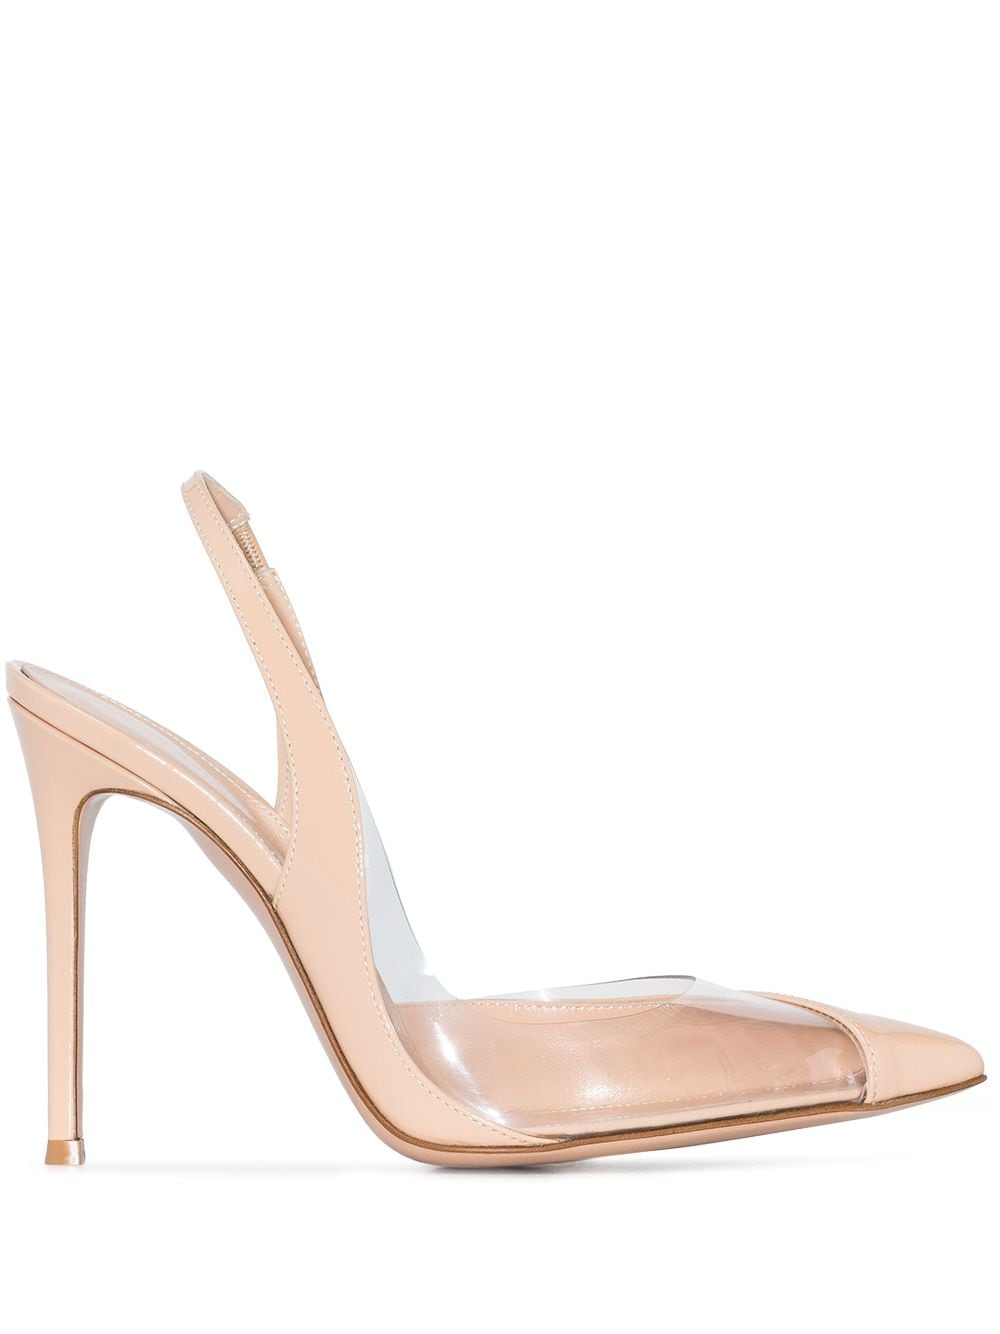 Image 1 of Gianvito Rossi 150mm slingback pumps